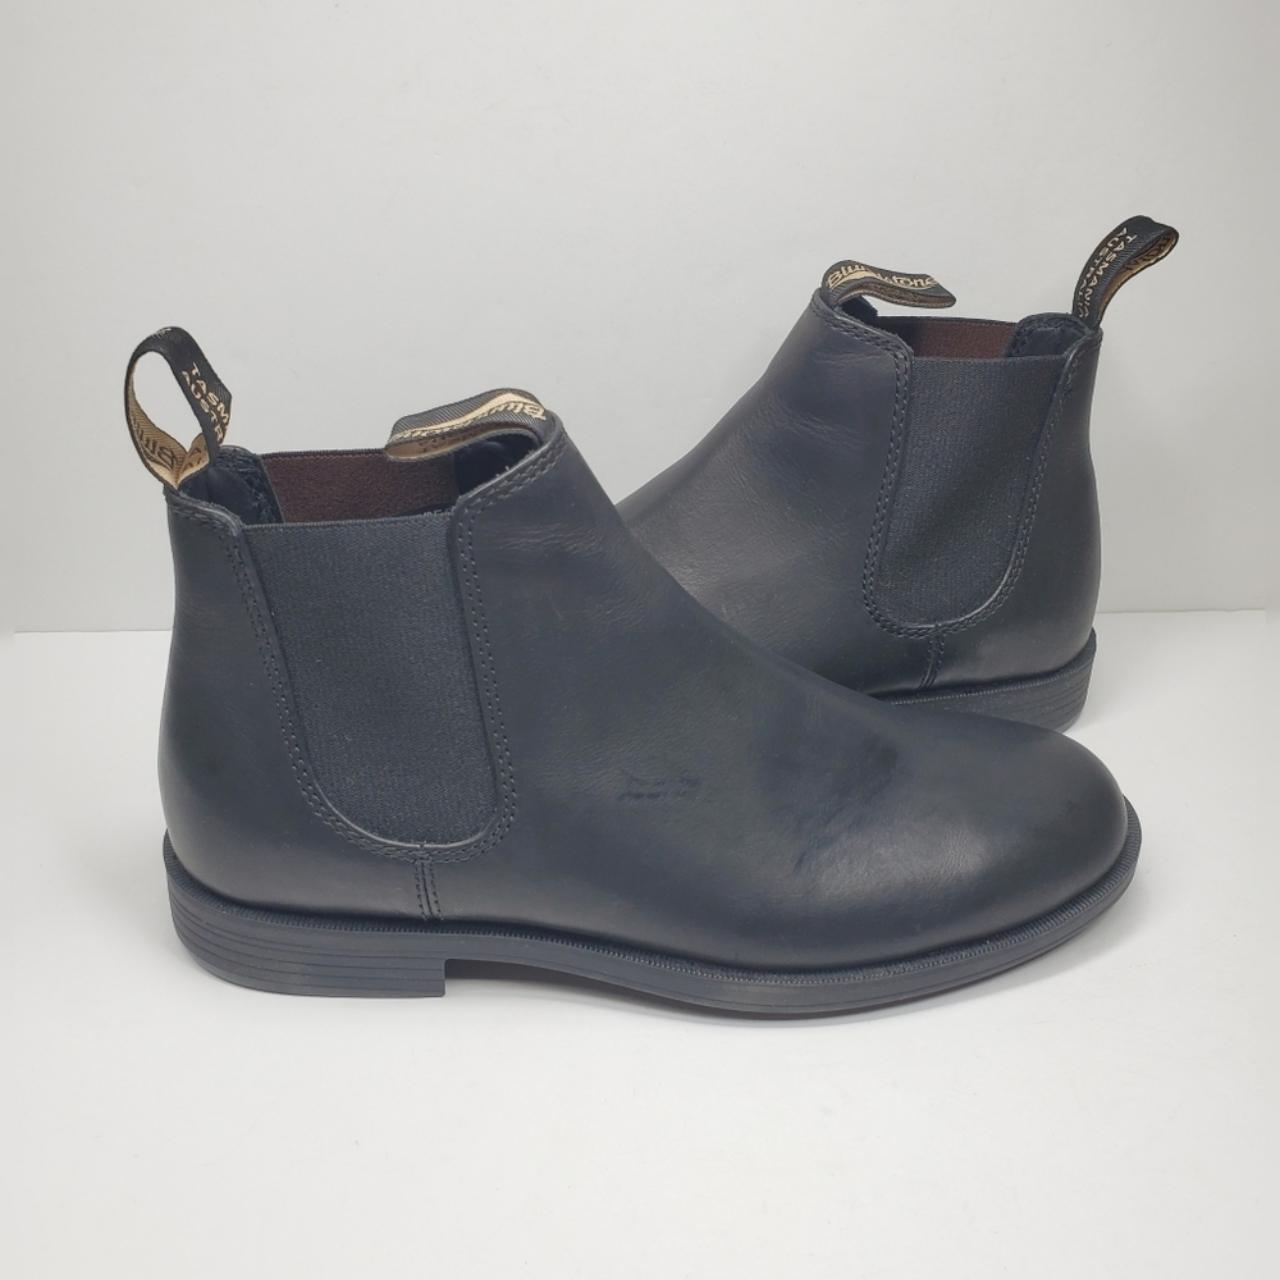 New Blundstone 1901 Black Leather Chelsea Boots A... - Depop